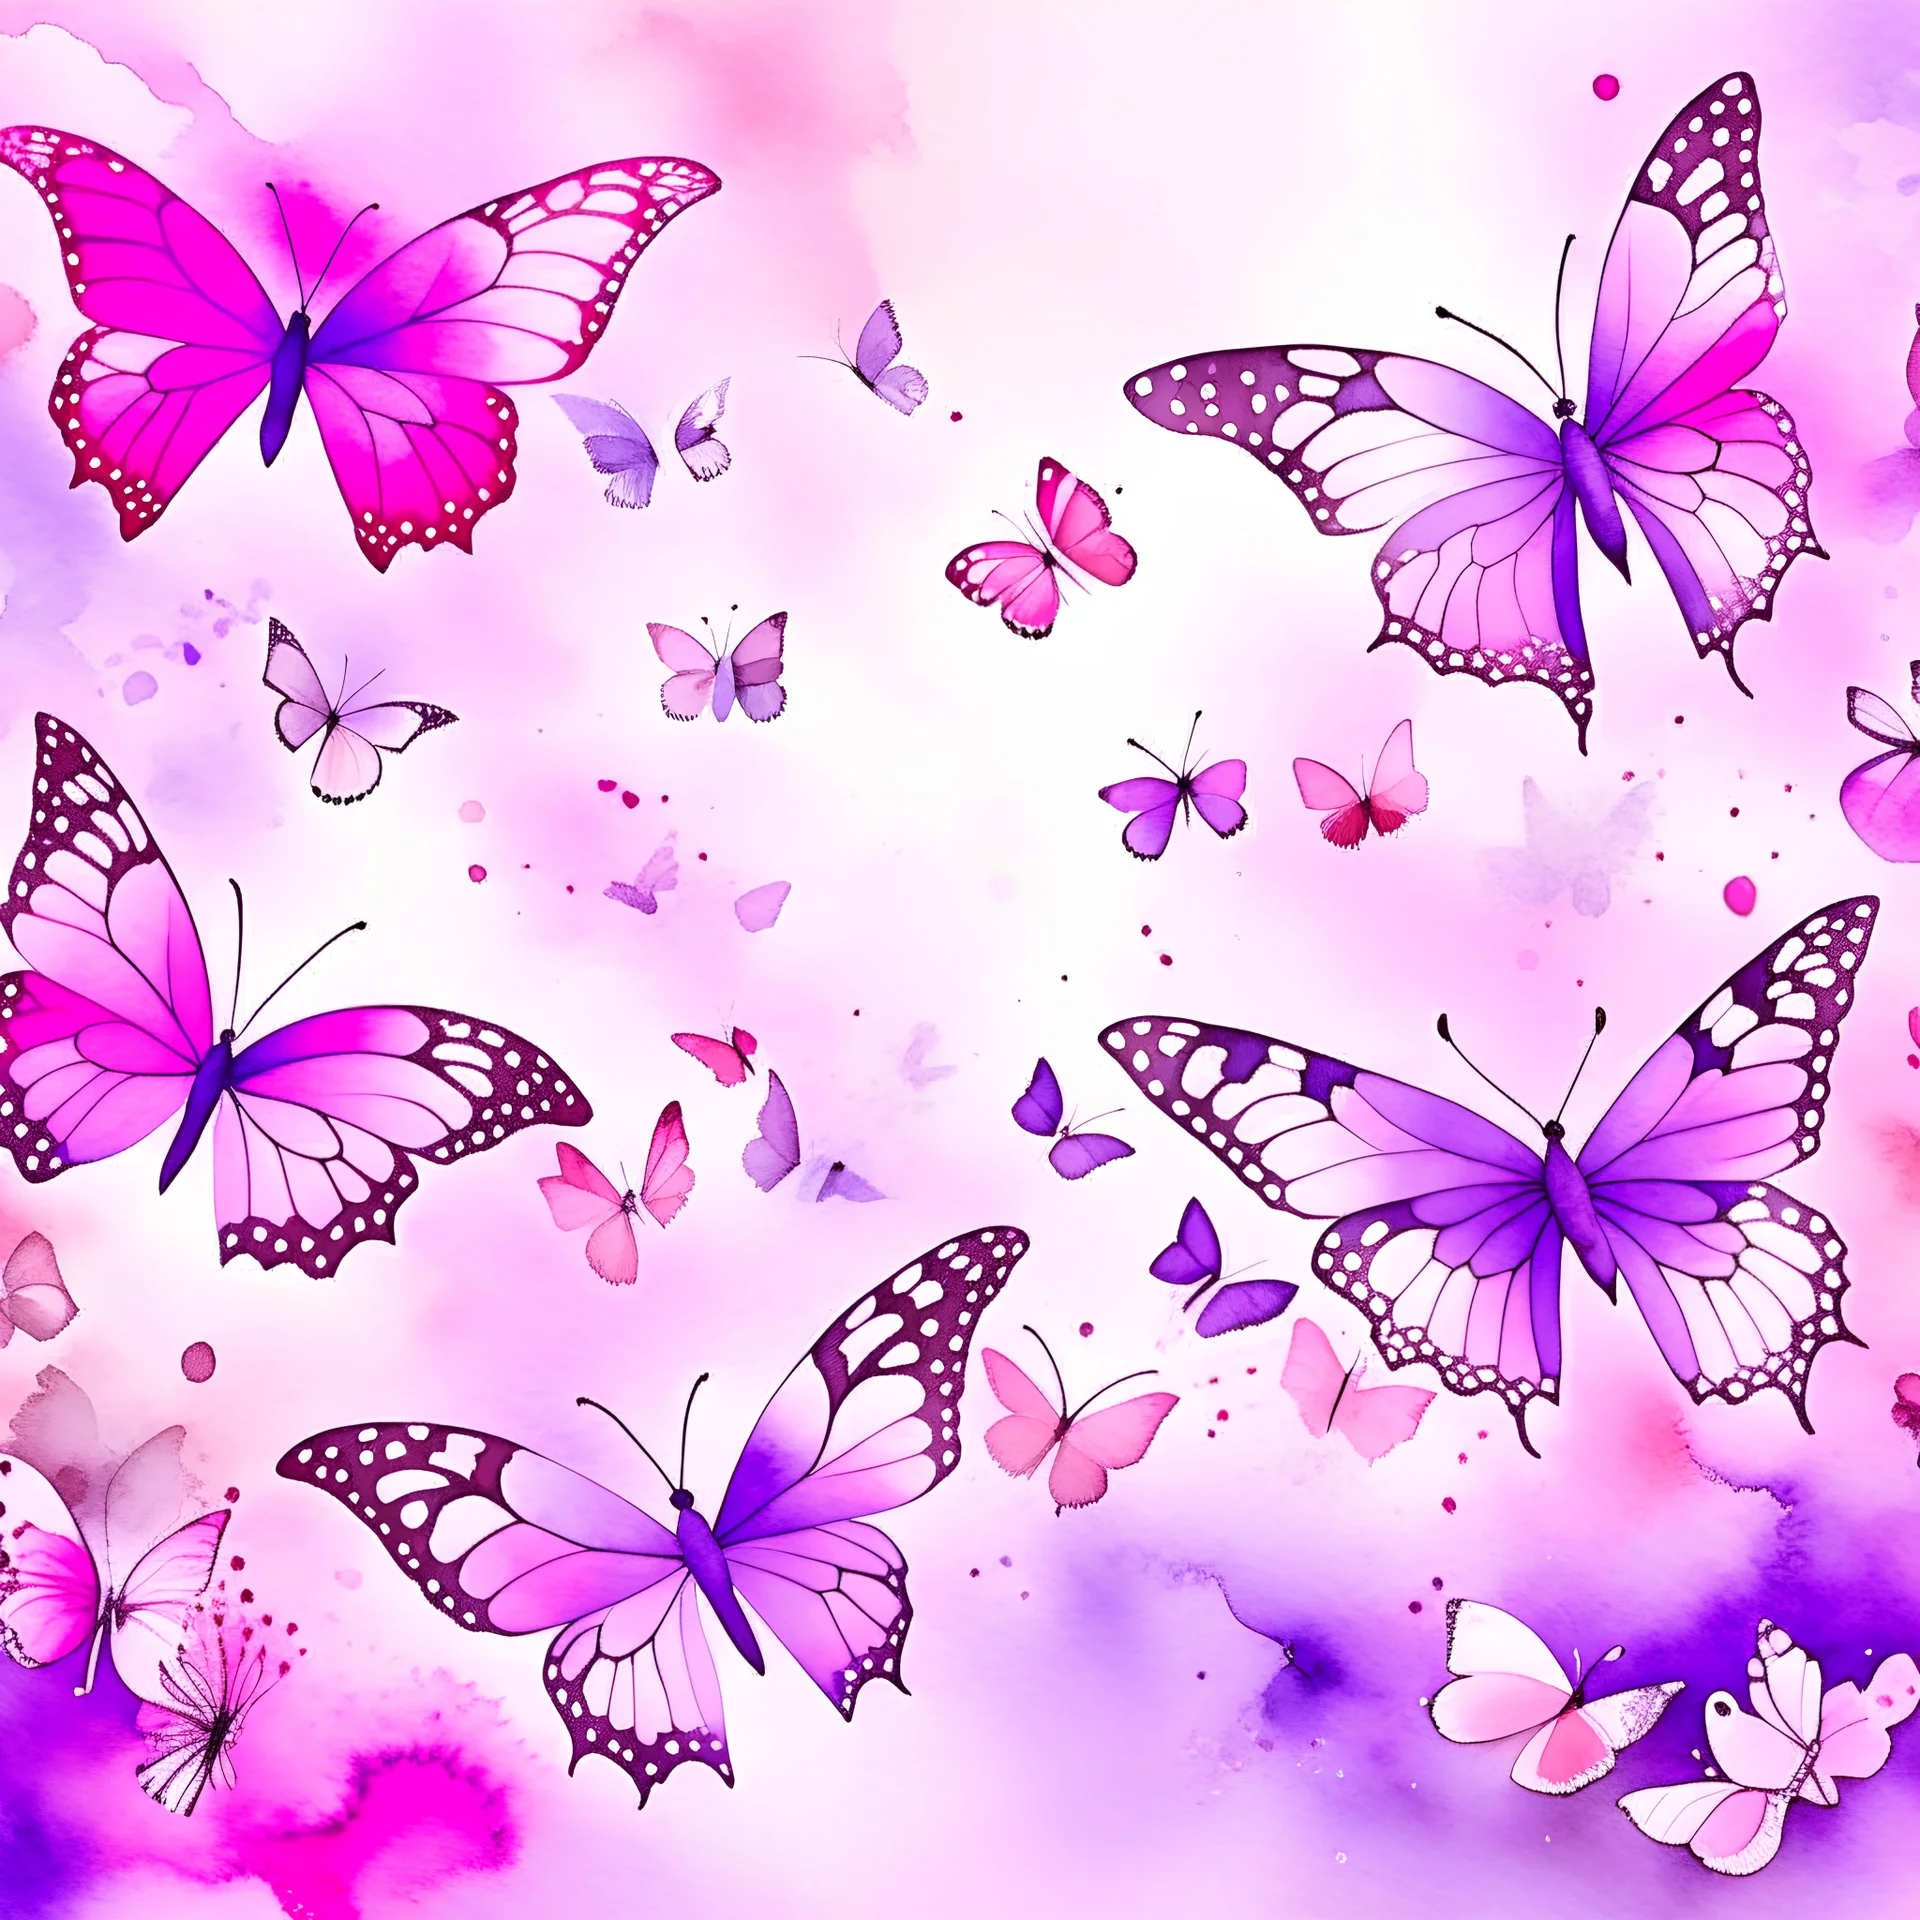 a watercolor painting with pink and white butterflies flying on a background, in the style of light purple and light pink, luminous shadowing, xbox 360 graphics, y2k aesthetic, i can't believe how beautiful this is, decorative borders, light purple and bronze